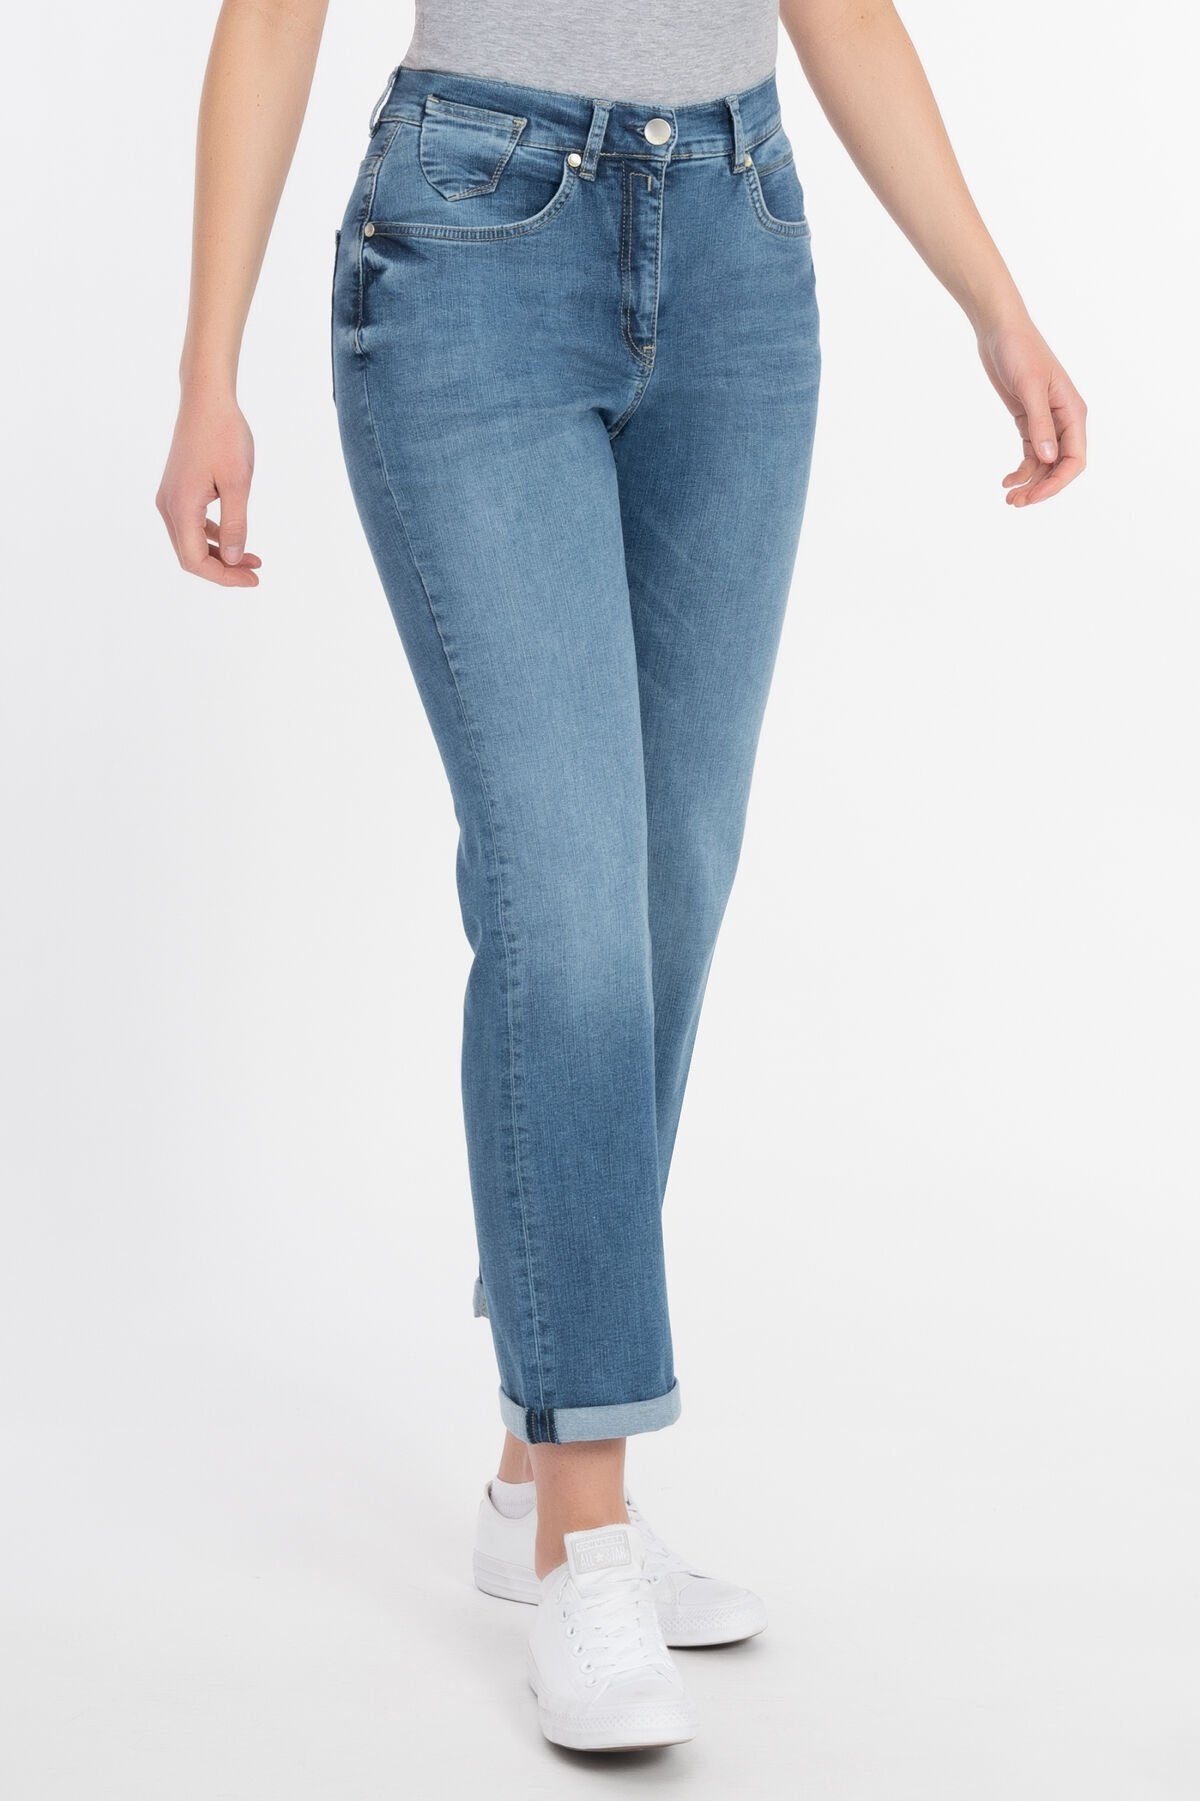 5-Pocket-Jeans authentischer in Recover Hazel Waschung Pants